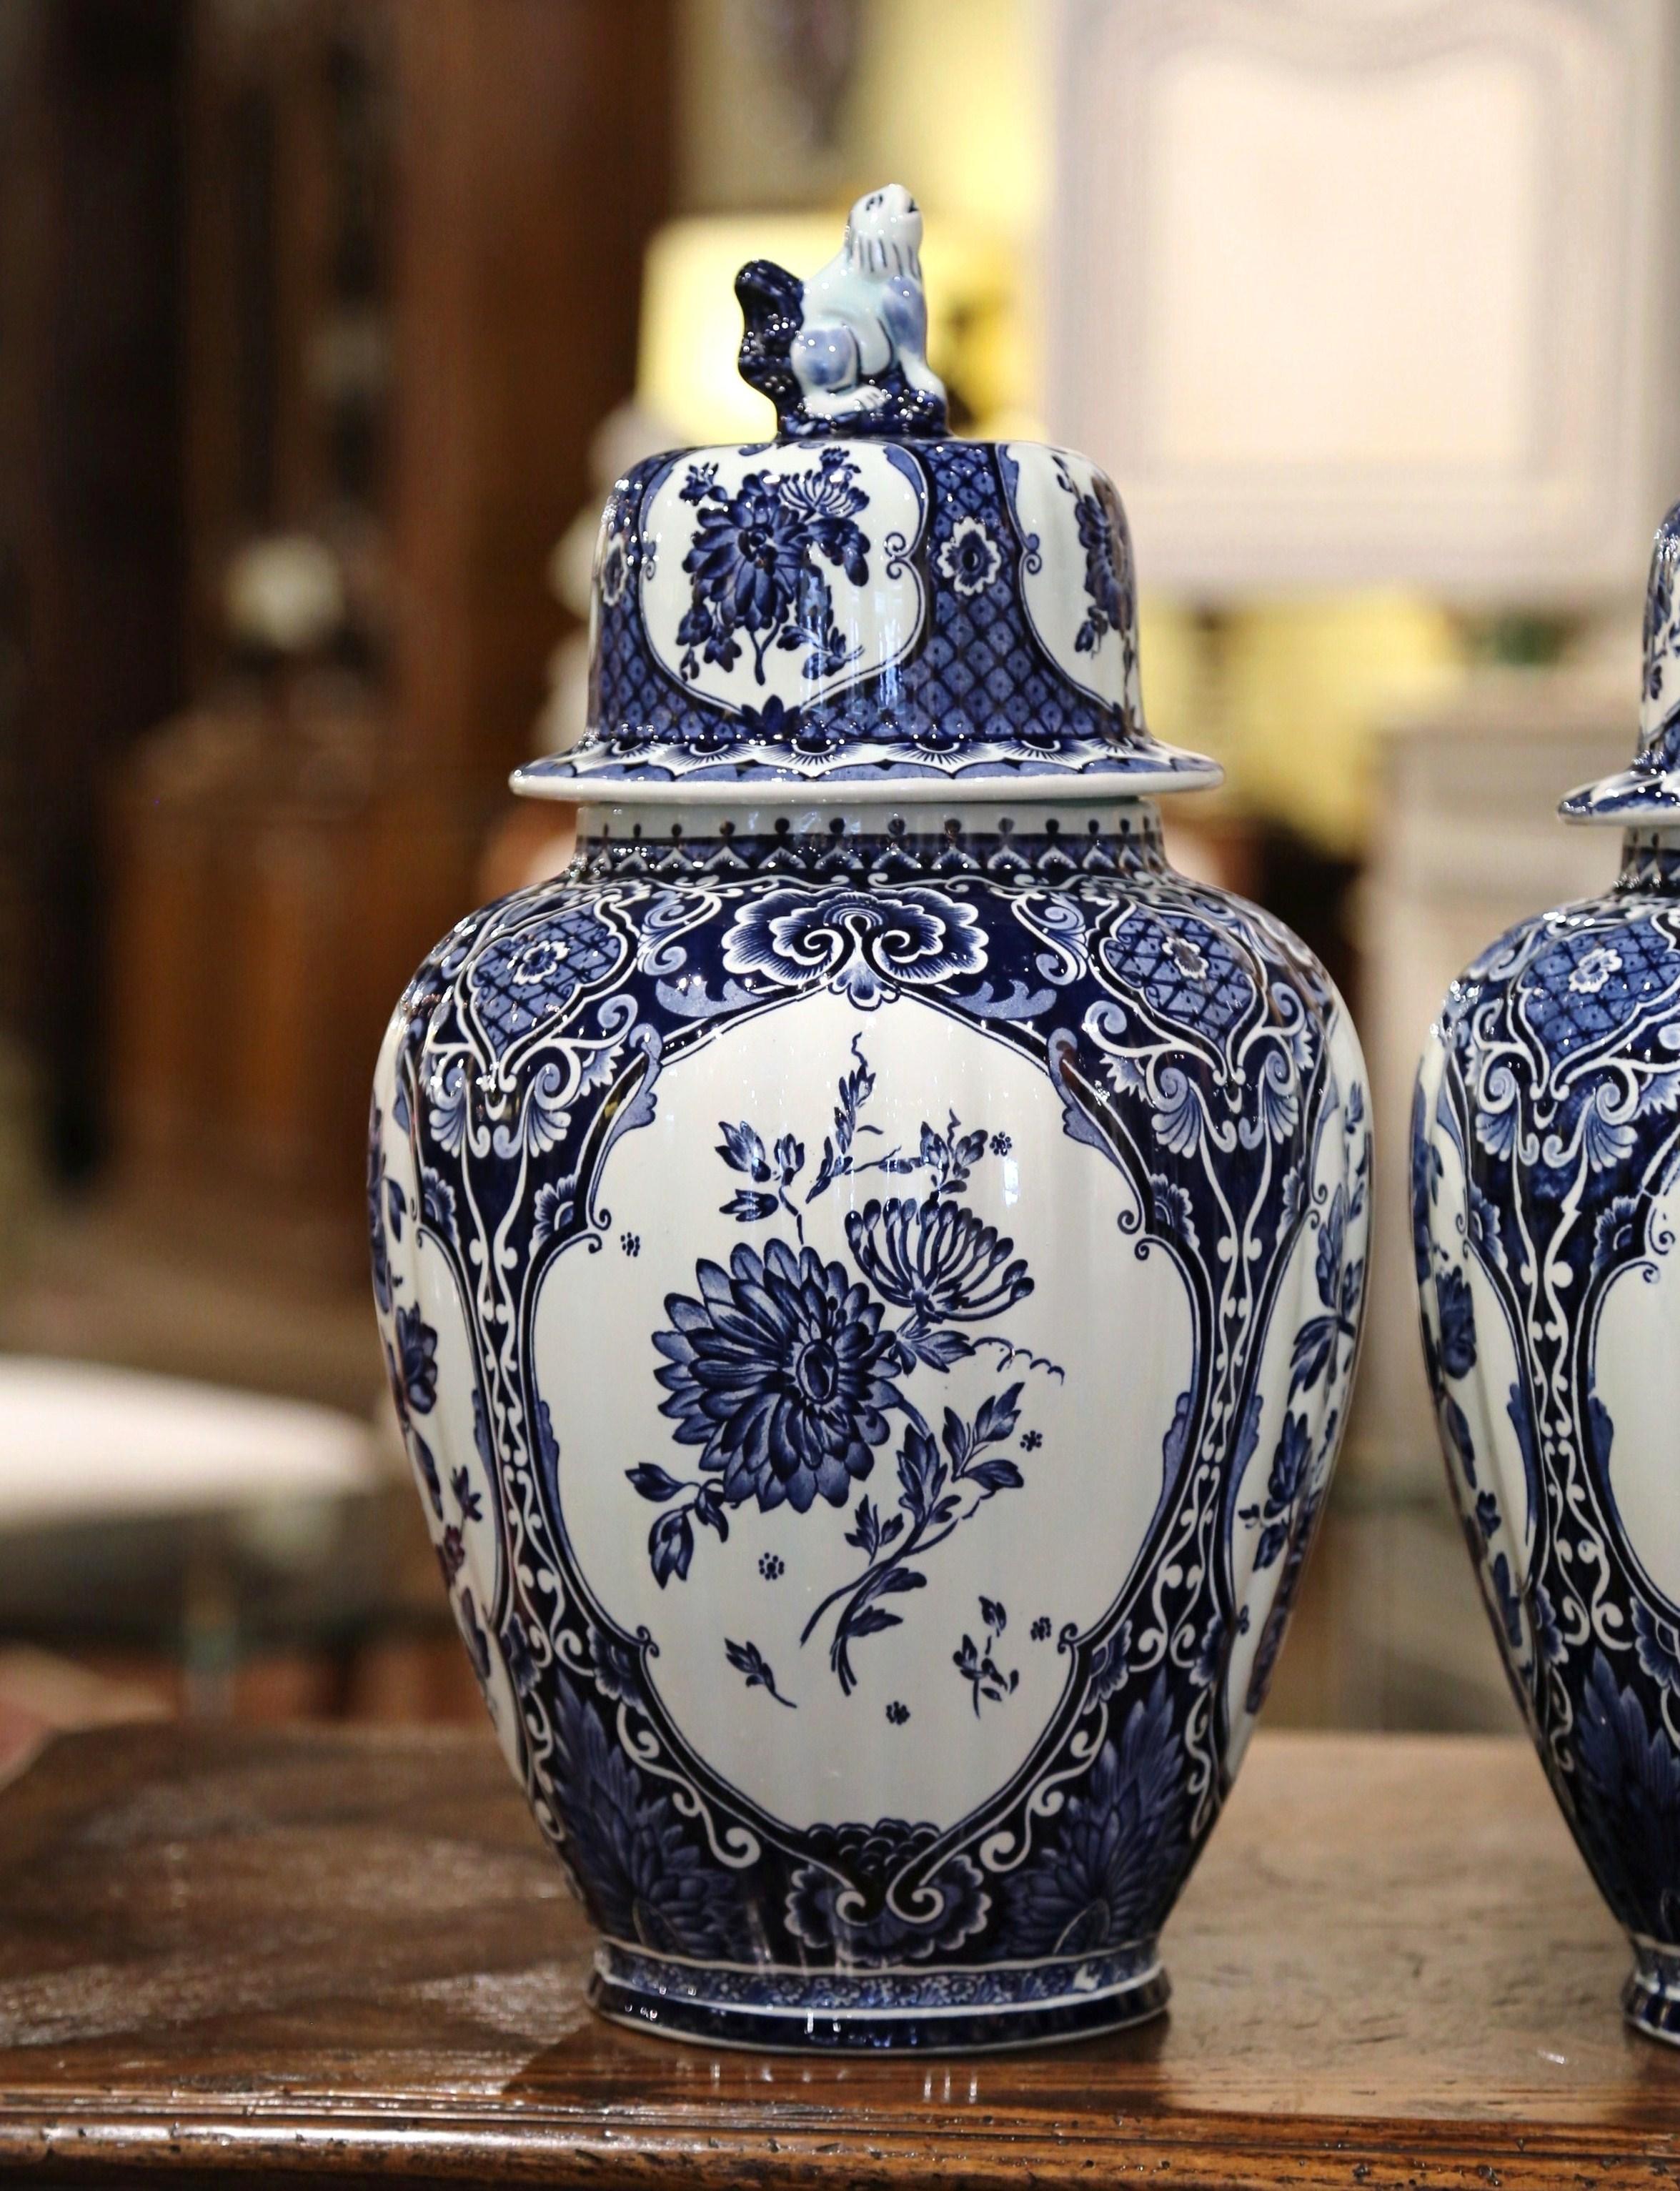 Place this elegant pair of antique ceramic ginger jars on a mantel, crafted in Holland, circa 1940, the large faience potiches feature hand painted medallions with Classic Dutch flower and foliage decor. The traditional blue and white jars are round